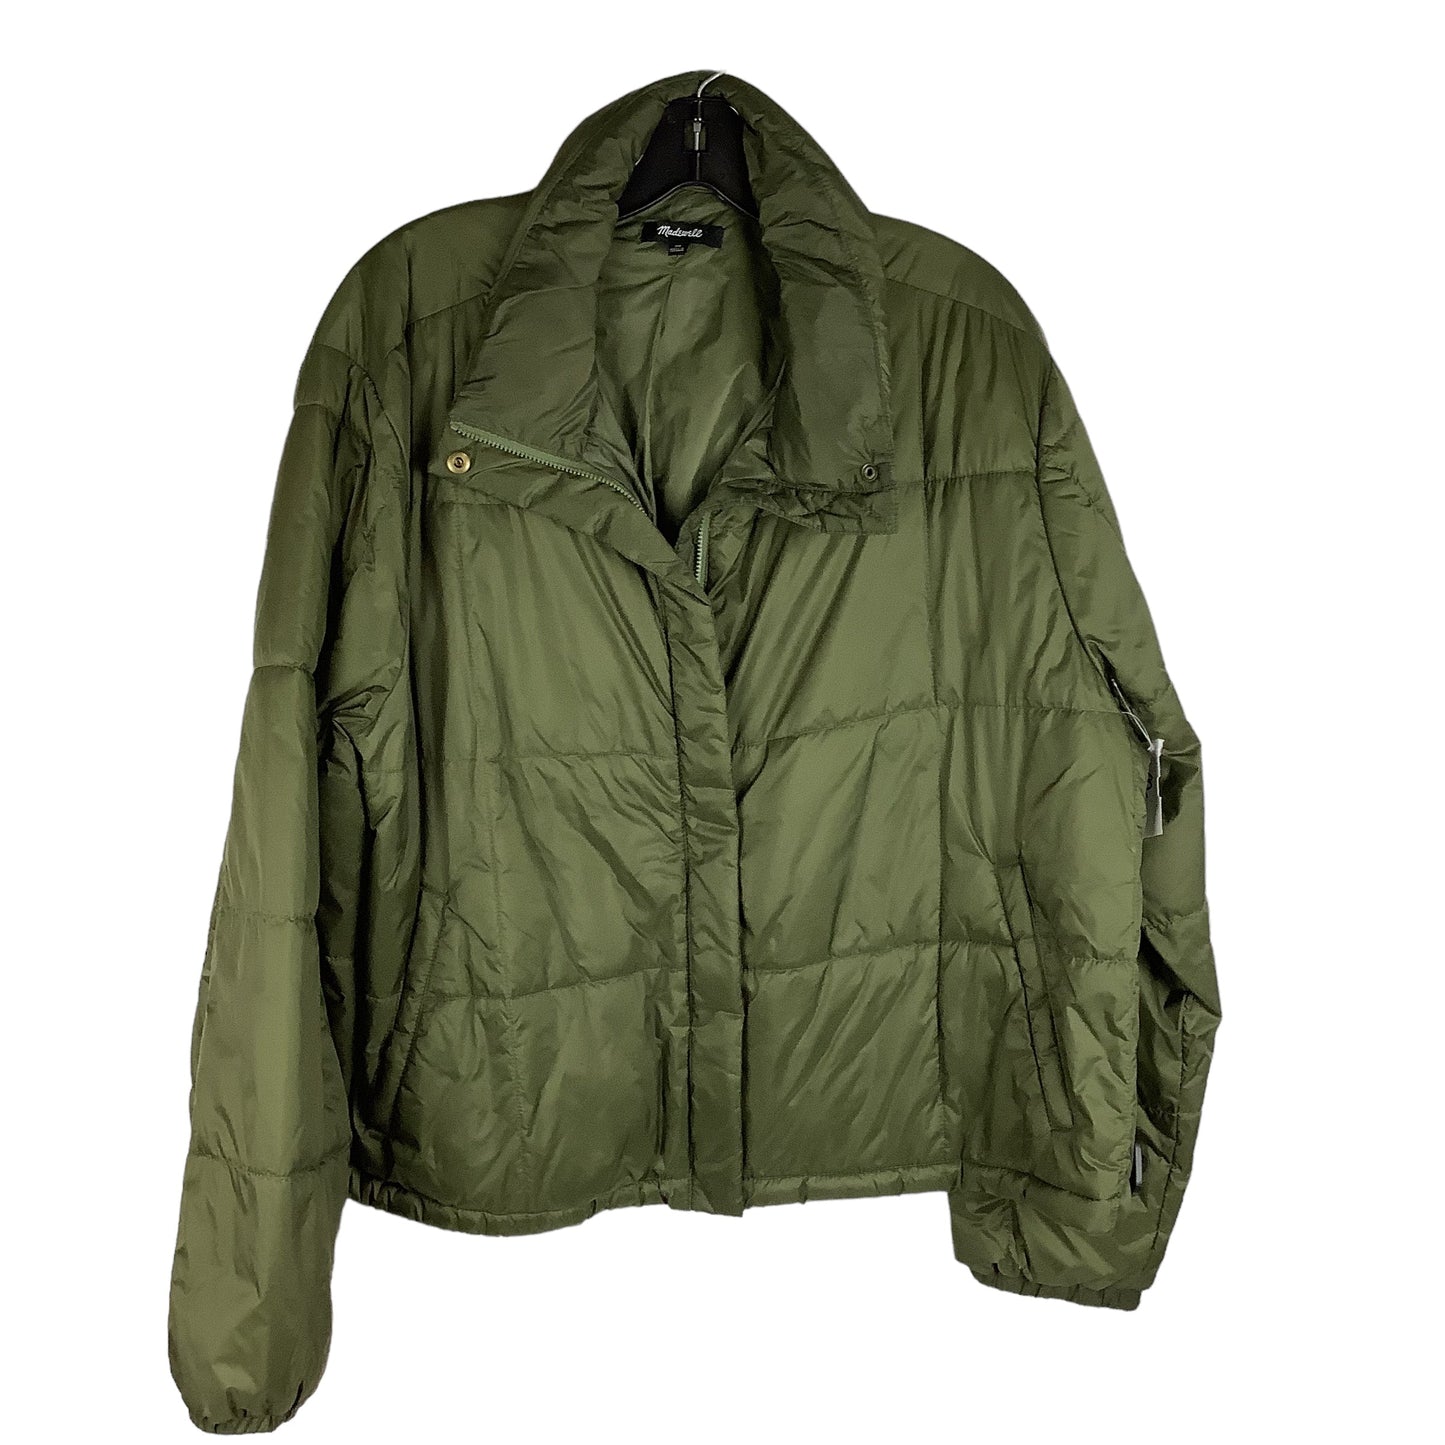 Green Jacket Puffer & Quilted Madewell, Size 2x